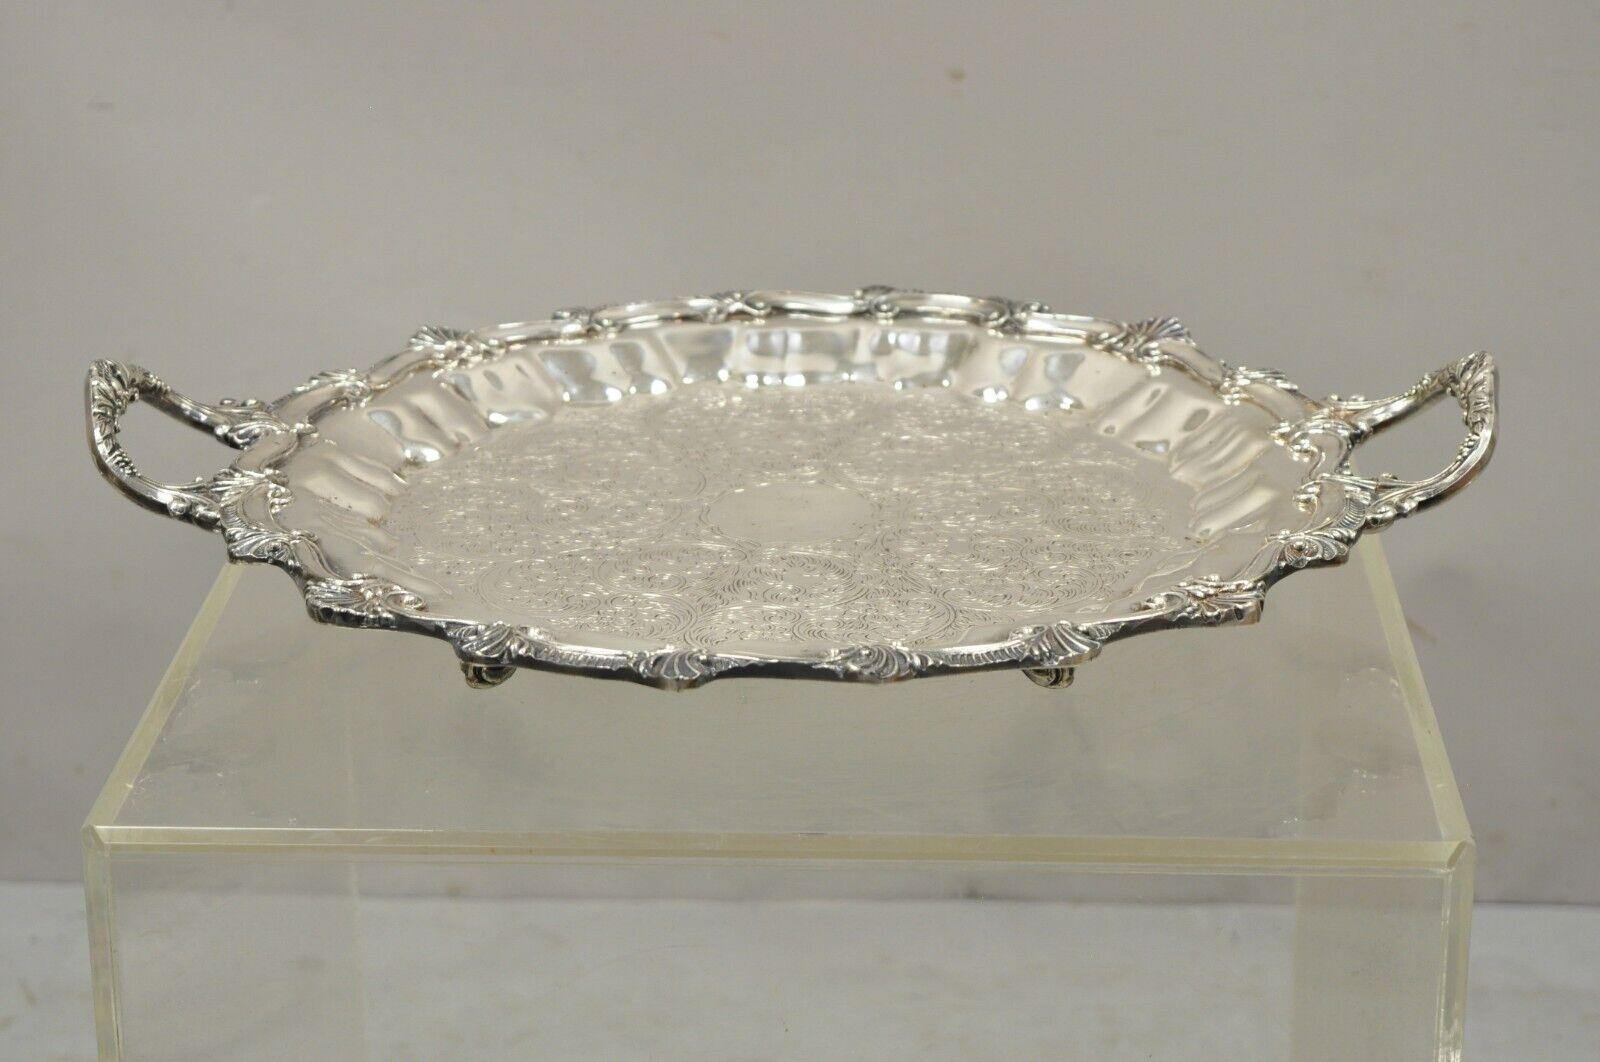 Vintage Regency Style Ornate Heavy Silver Plate Twin Handle Scalloped Platter Tray on Feet. Item features nice heavy weight, raised on twin ornate handles, scalloped edge with shells, engraved center, ornate feet, very nice vintage item, great style